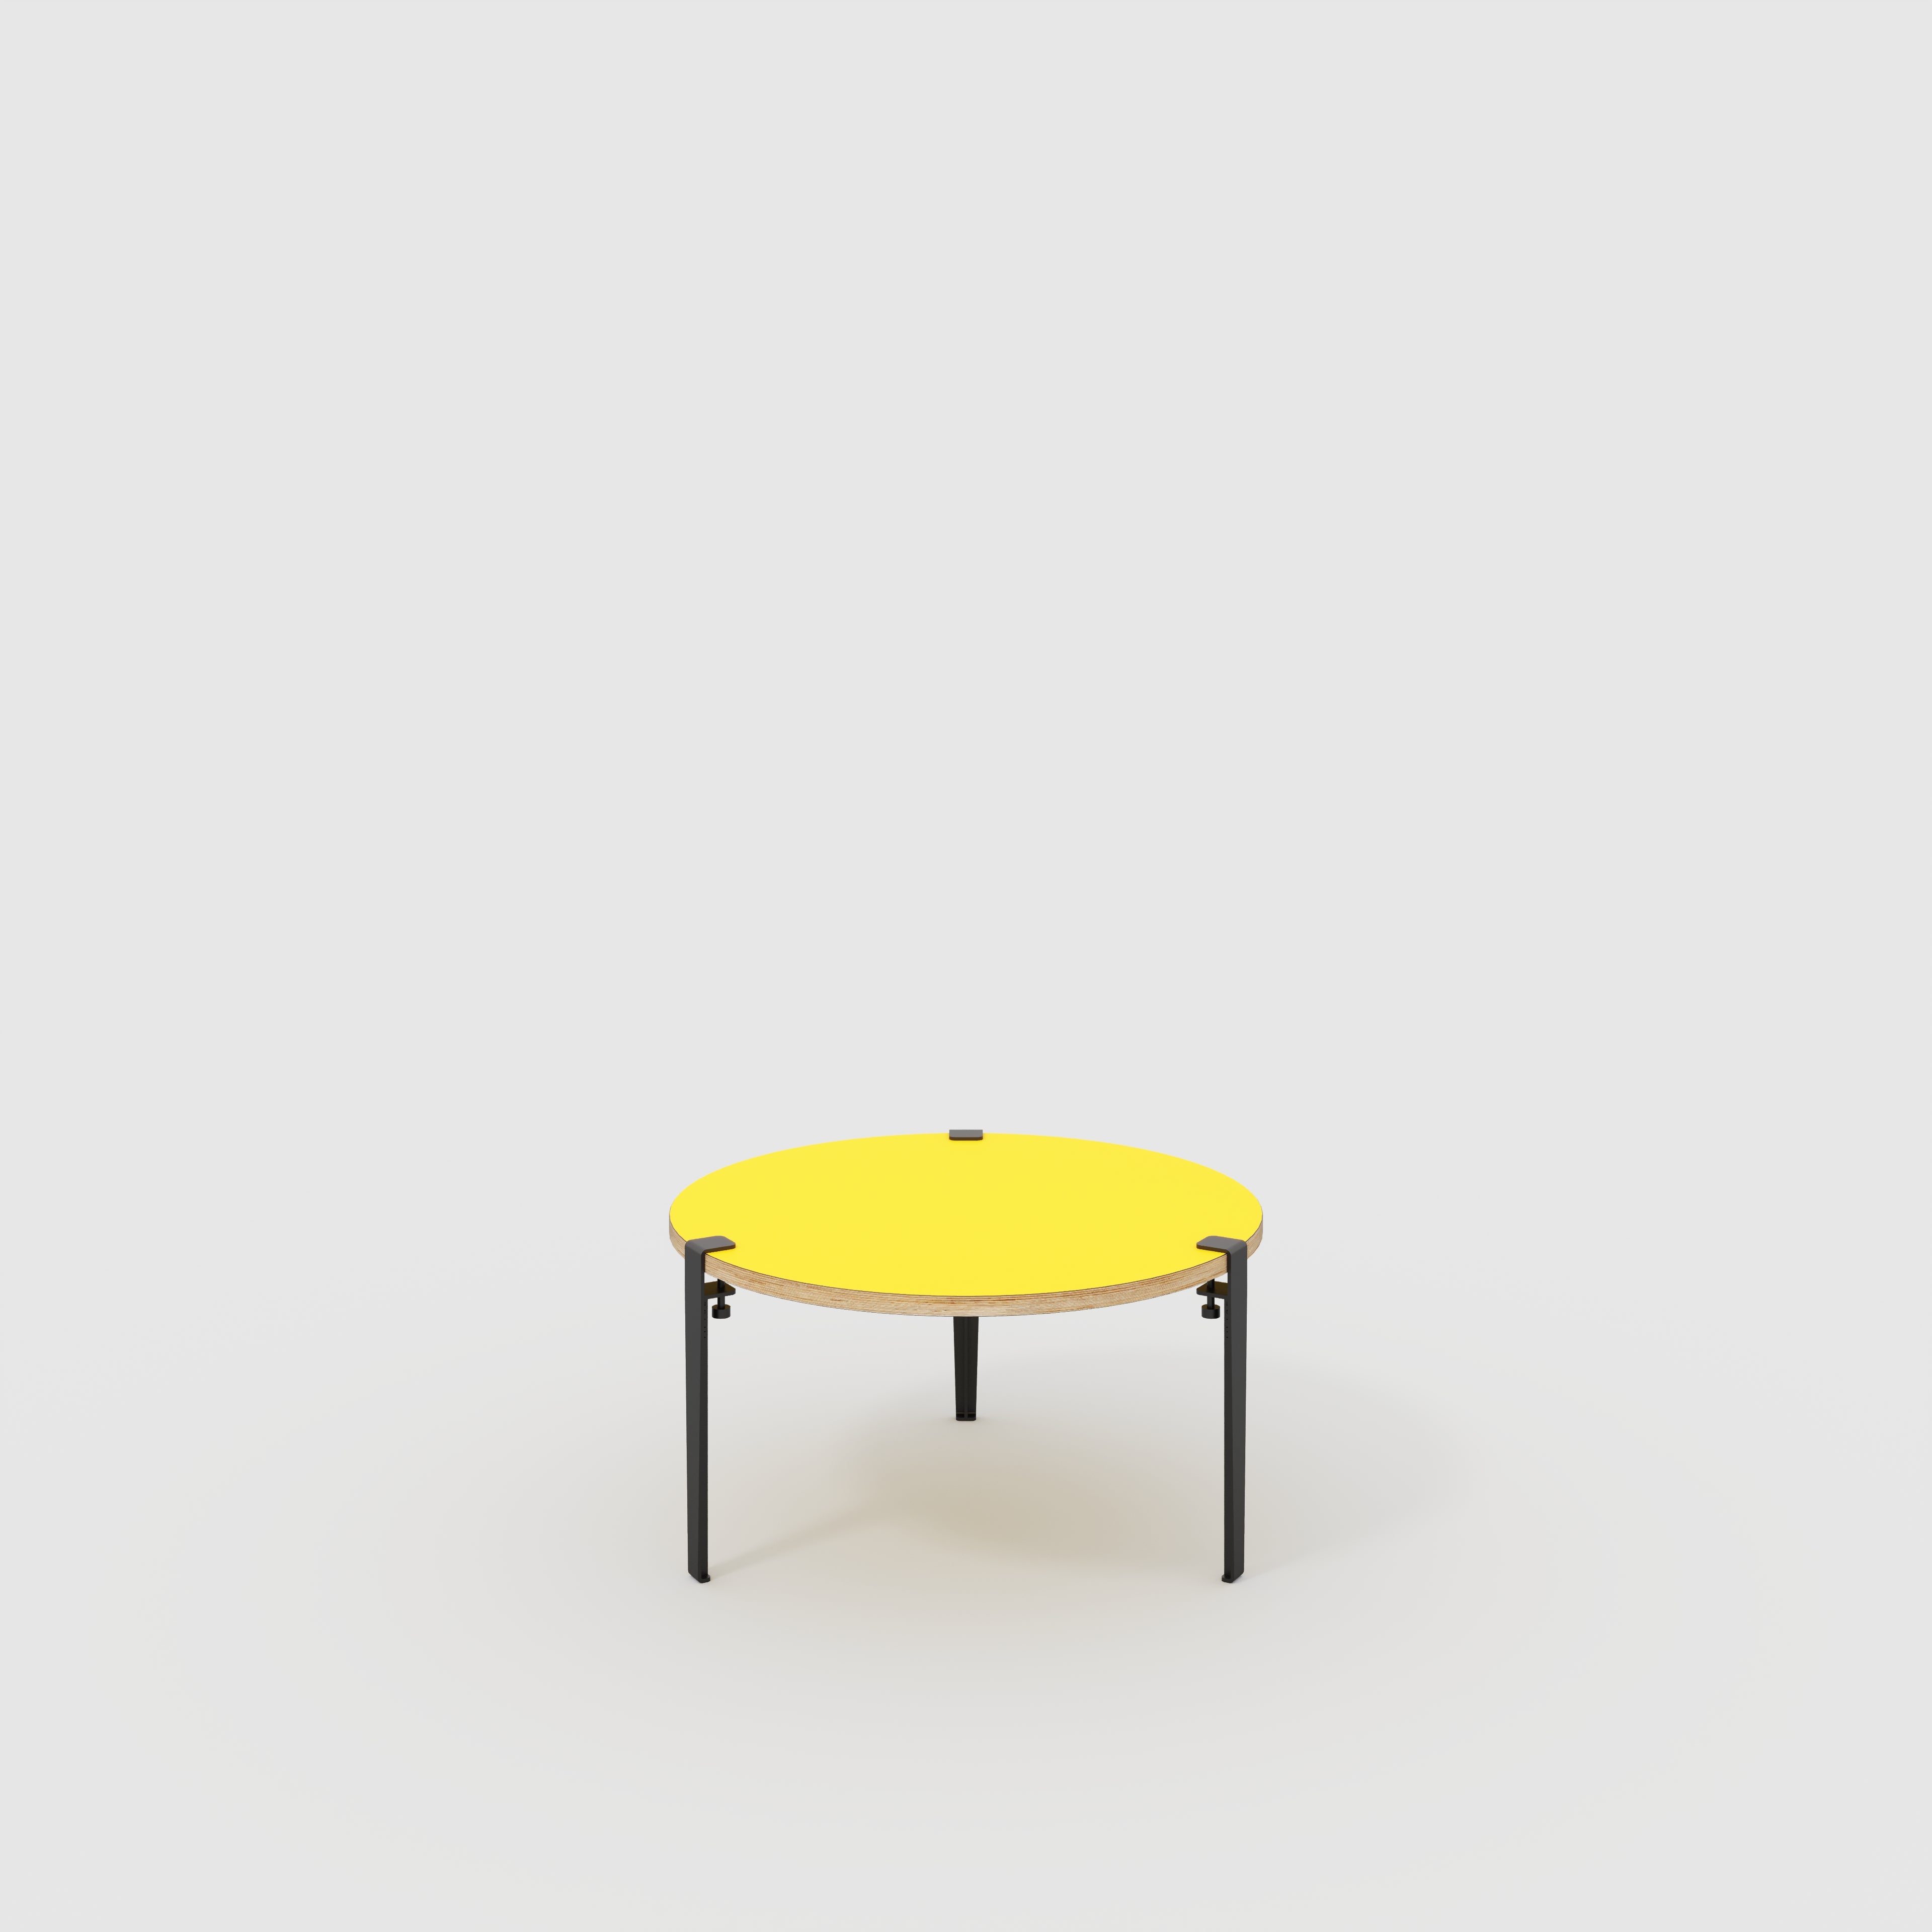 Round Coffee Table with Black Tiptoe Legs - Formica Chrome Yellow - 800(dia) x 430(h)